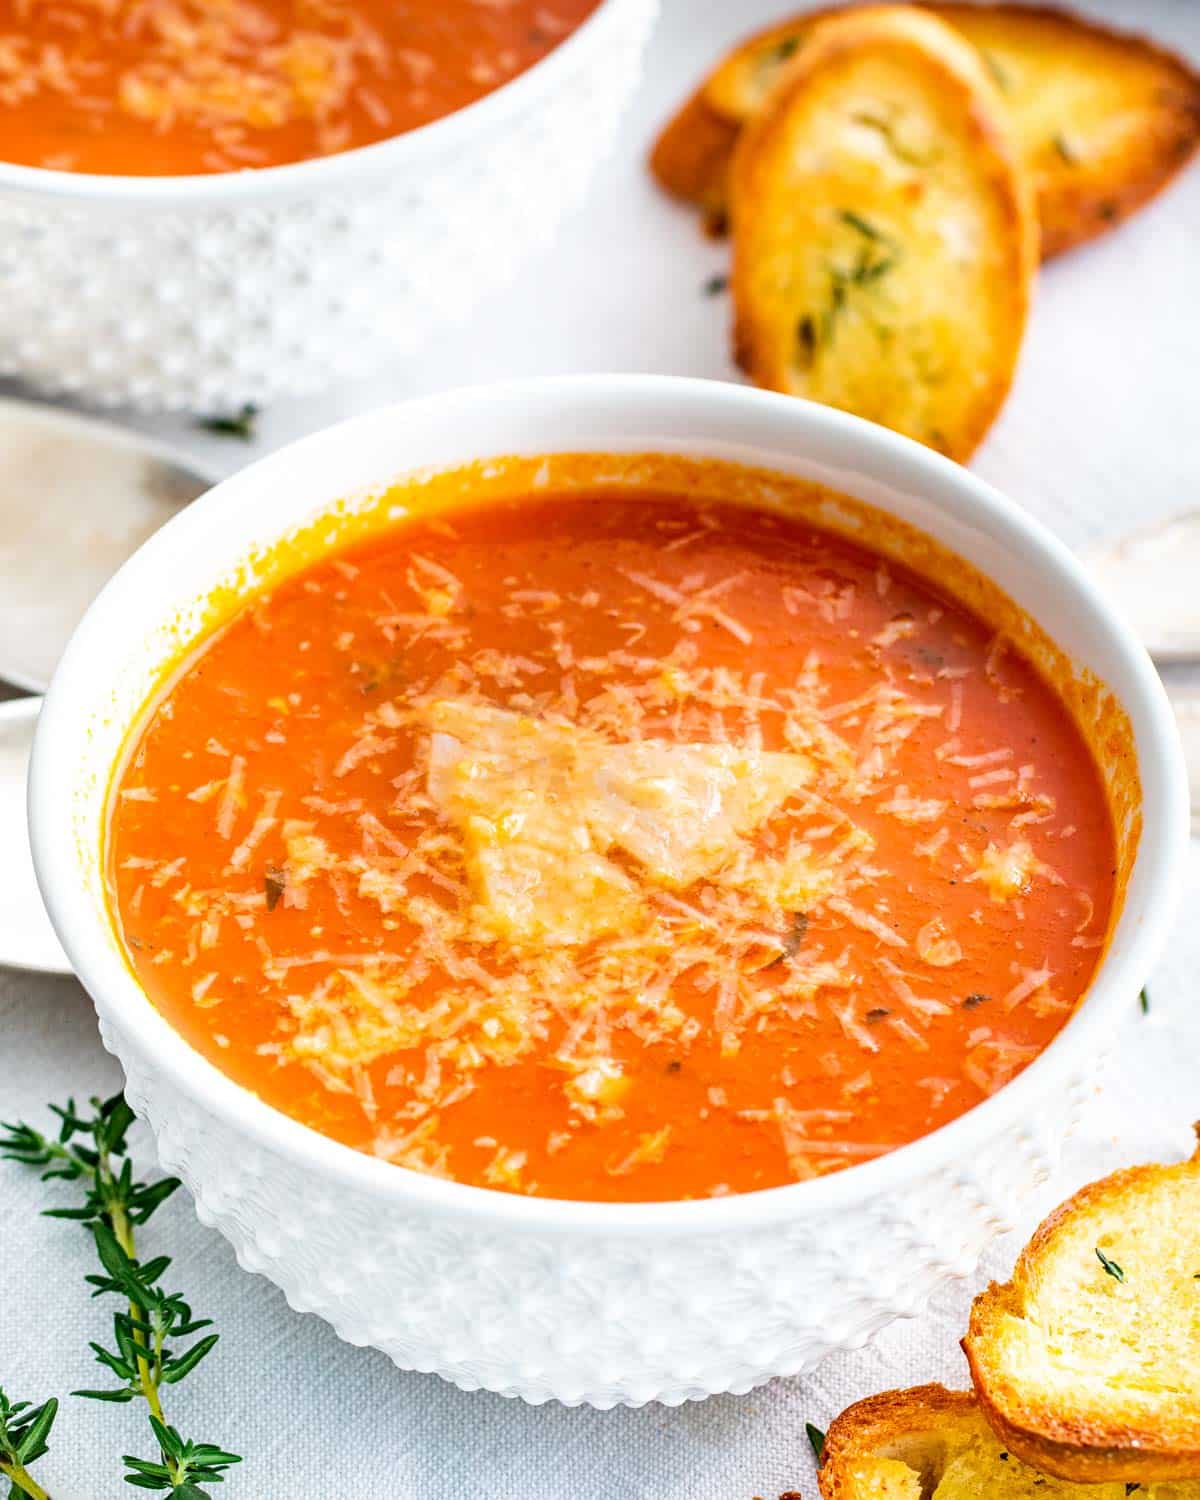 roasted tomato soup in a white bowl with toasted bread.